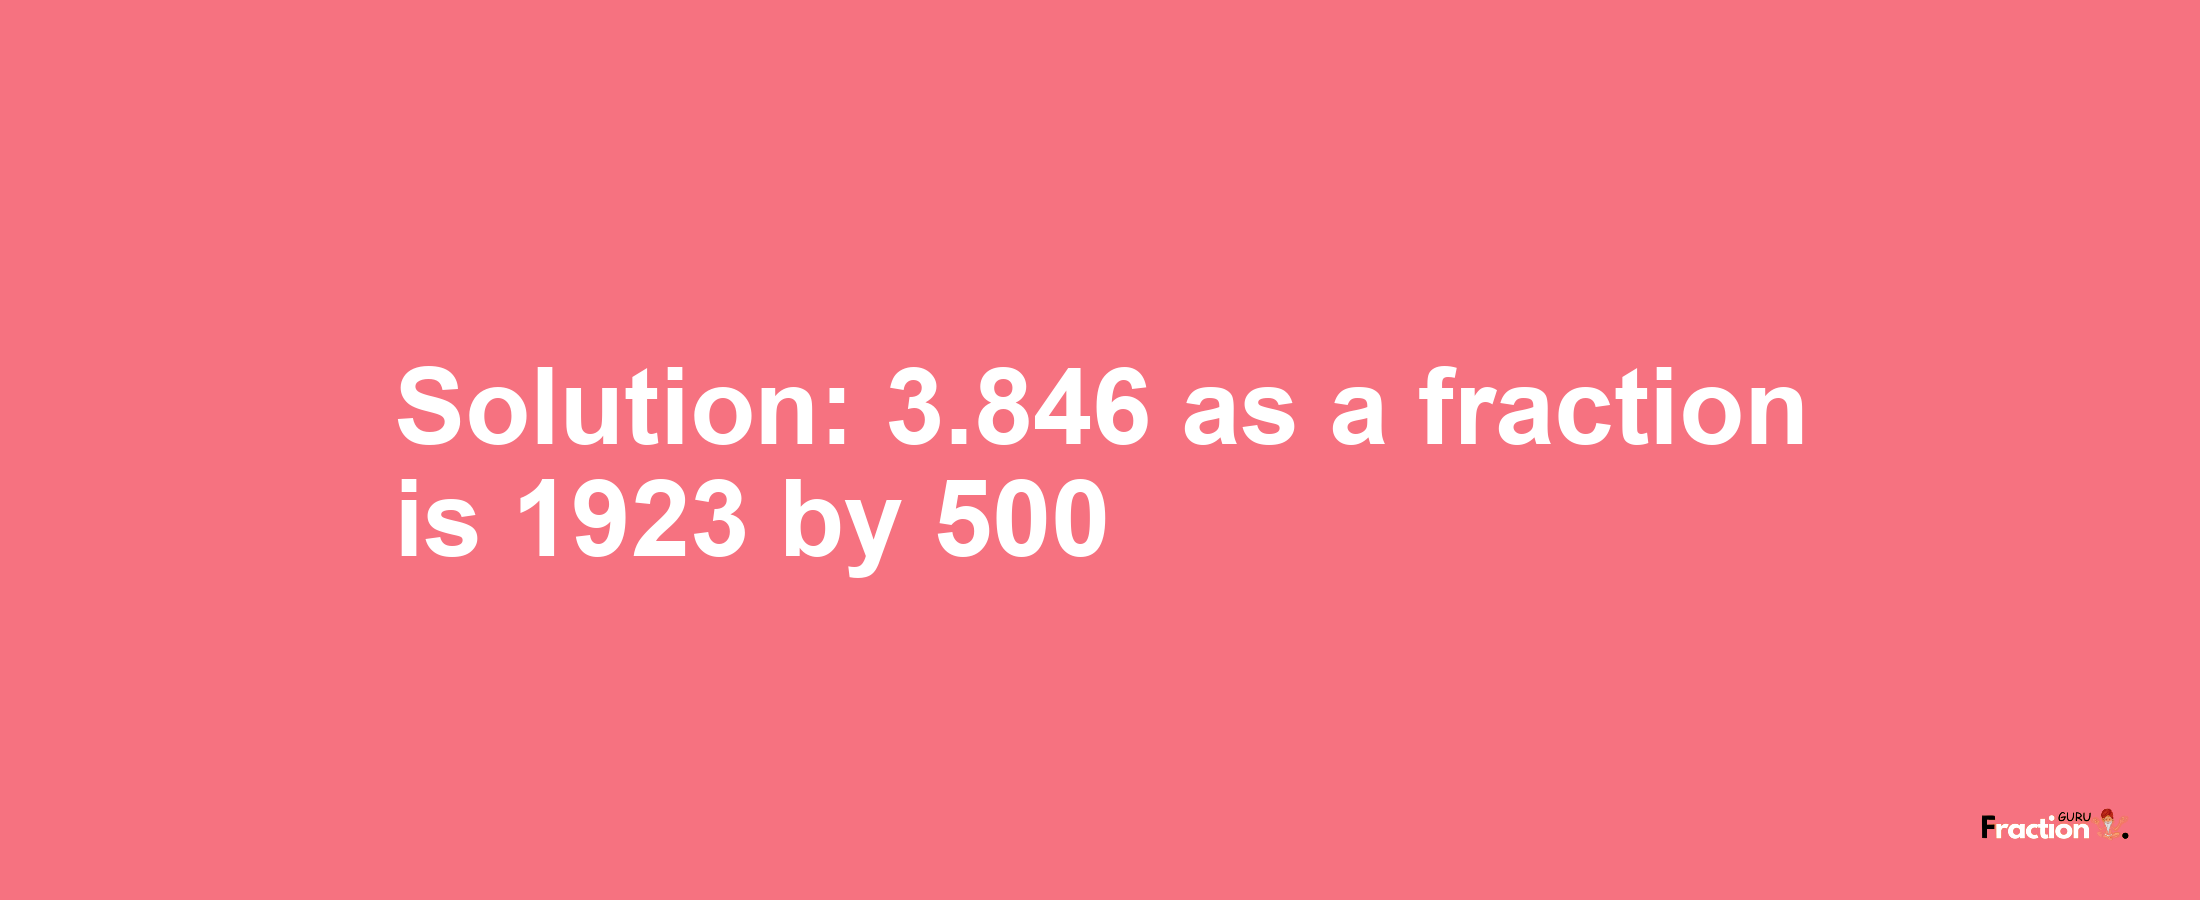 Solution:3.846 as a fraction is 1923/500